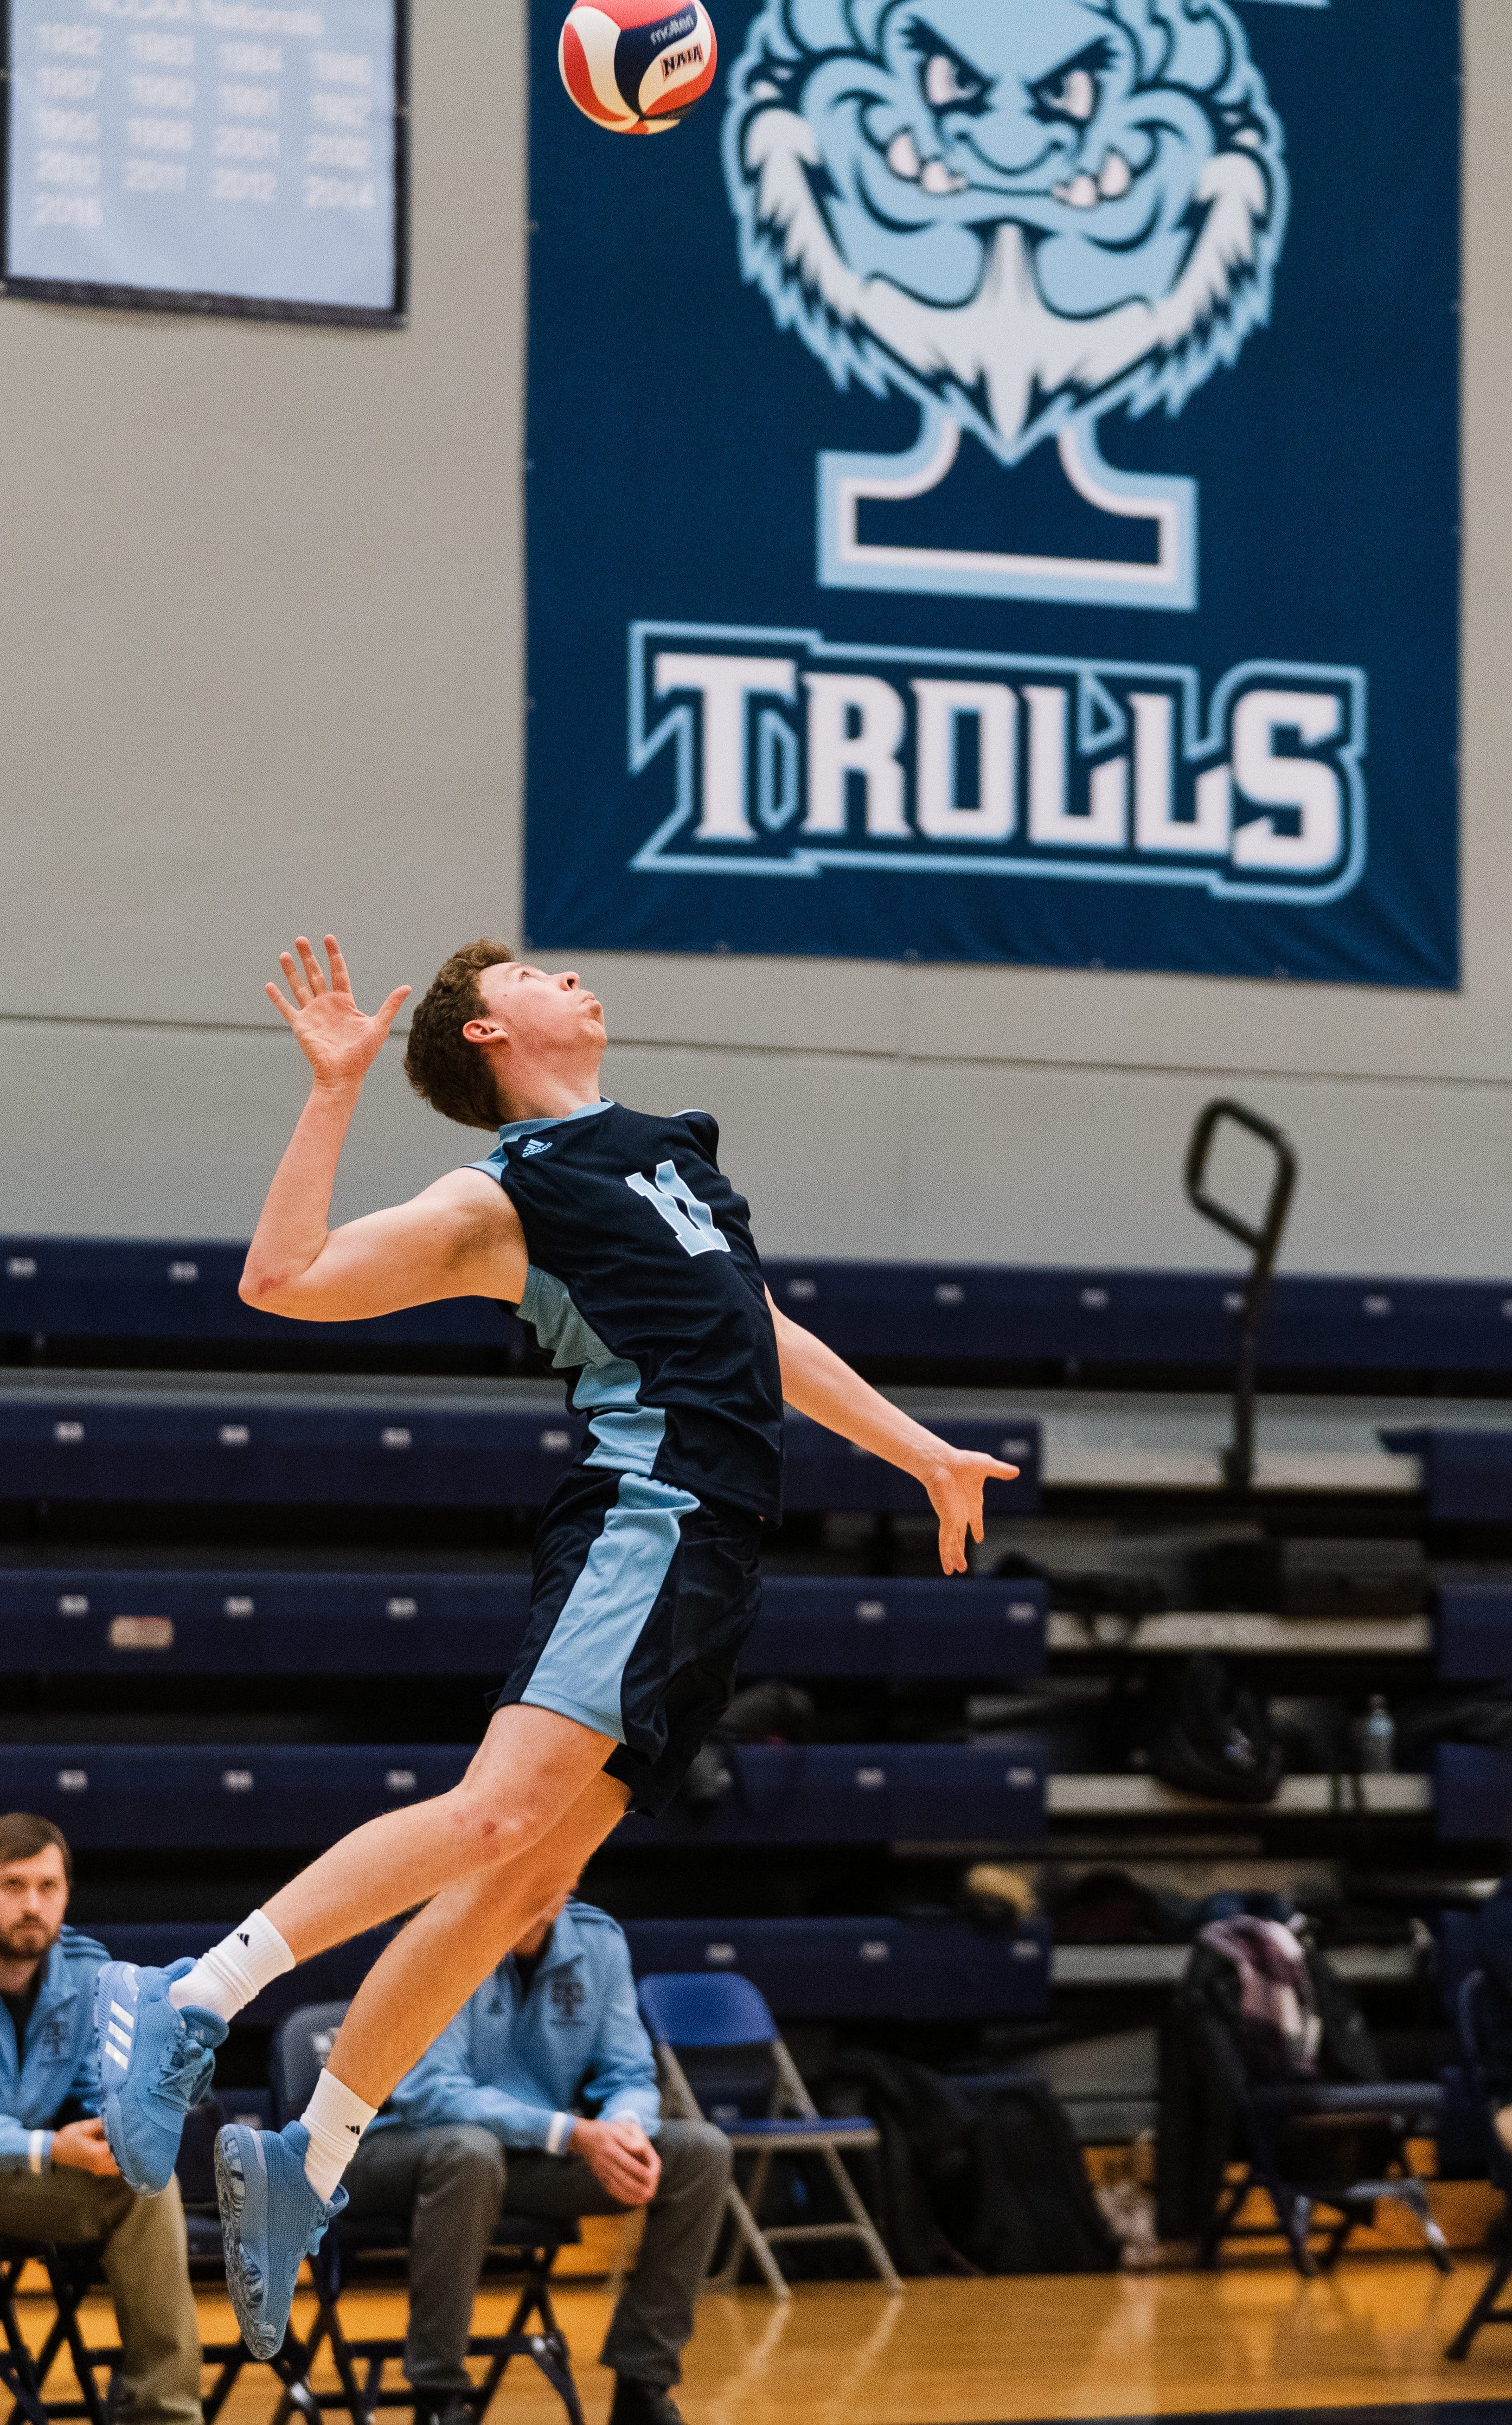 men's volleyball versus Goshen 2020: payer jumping up to spike the ball